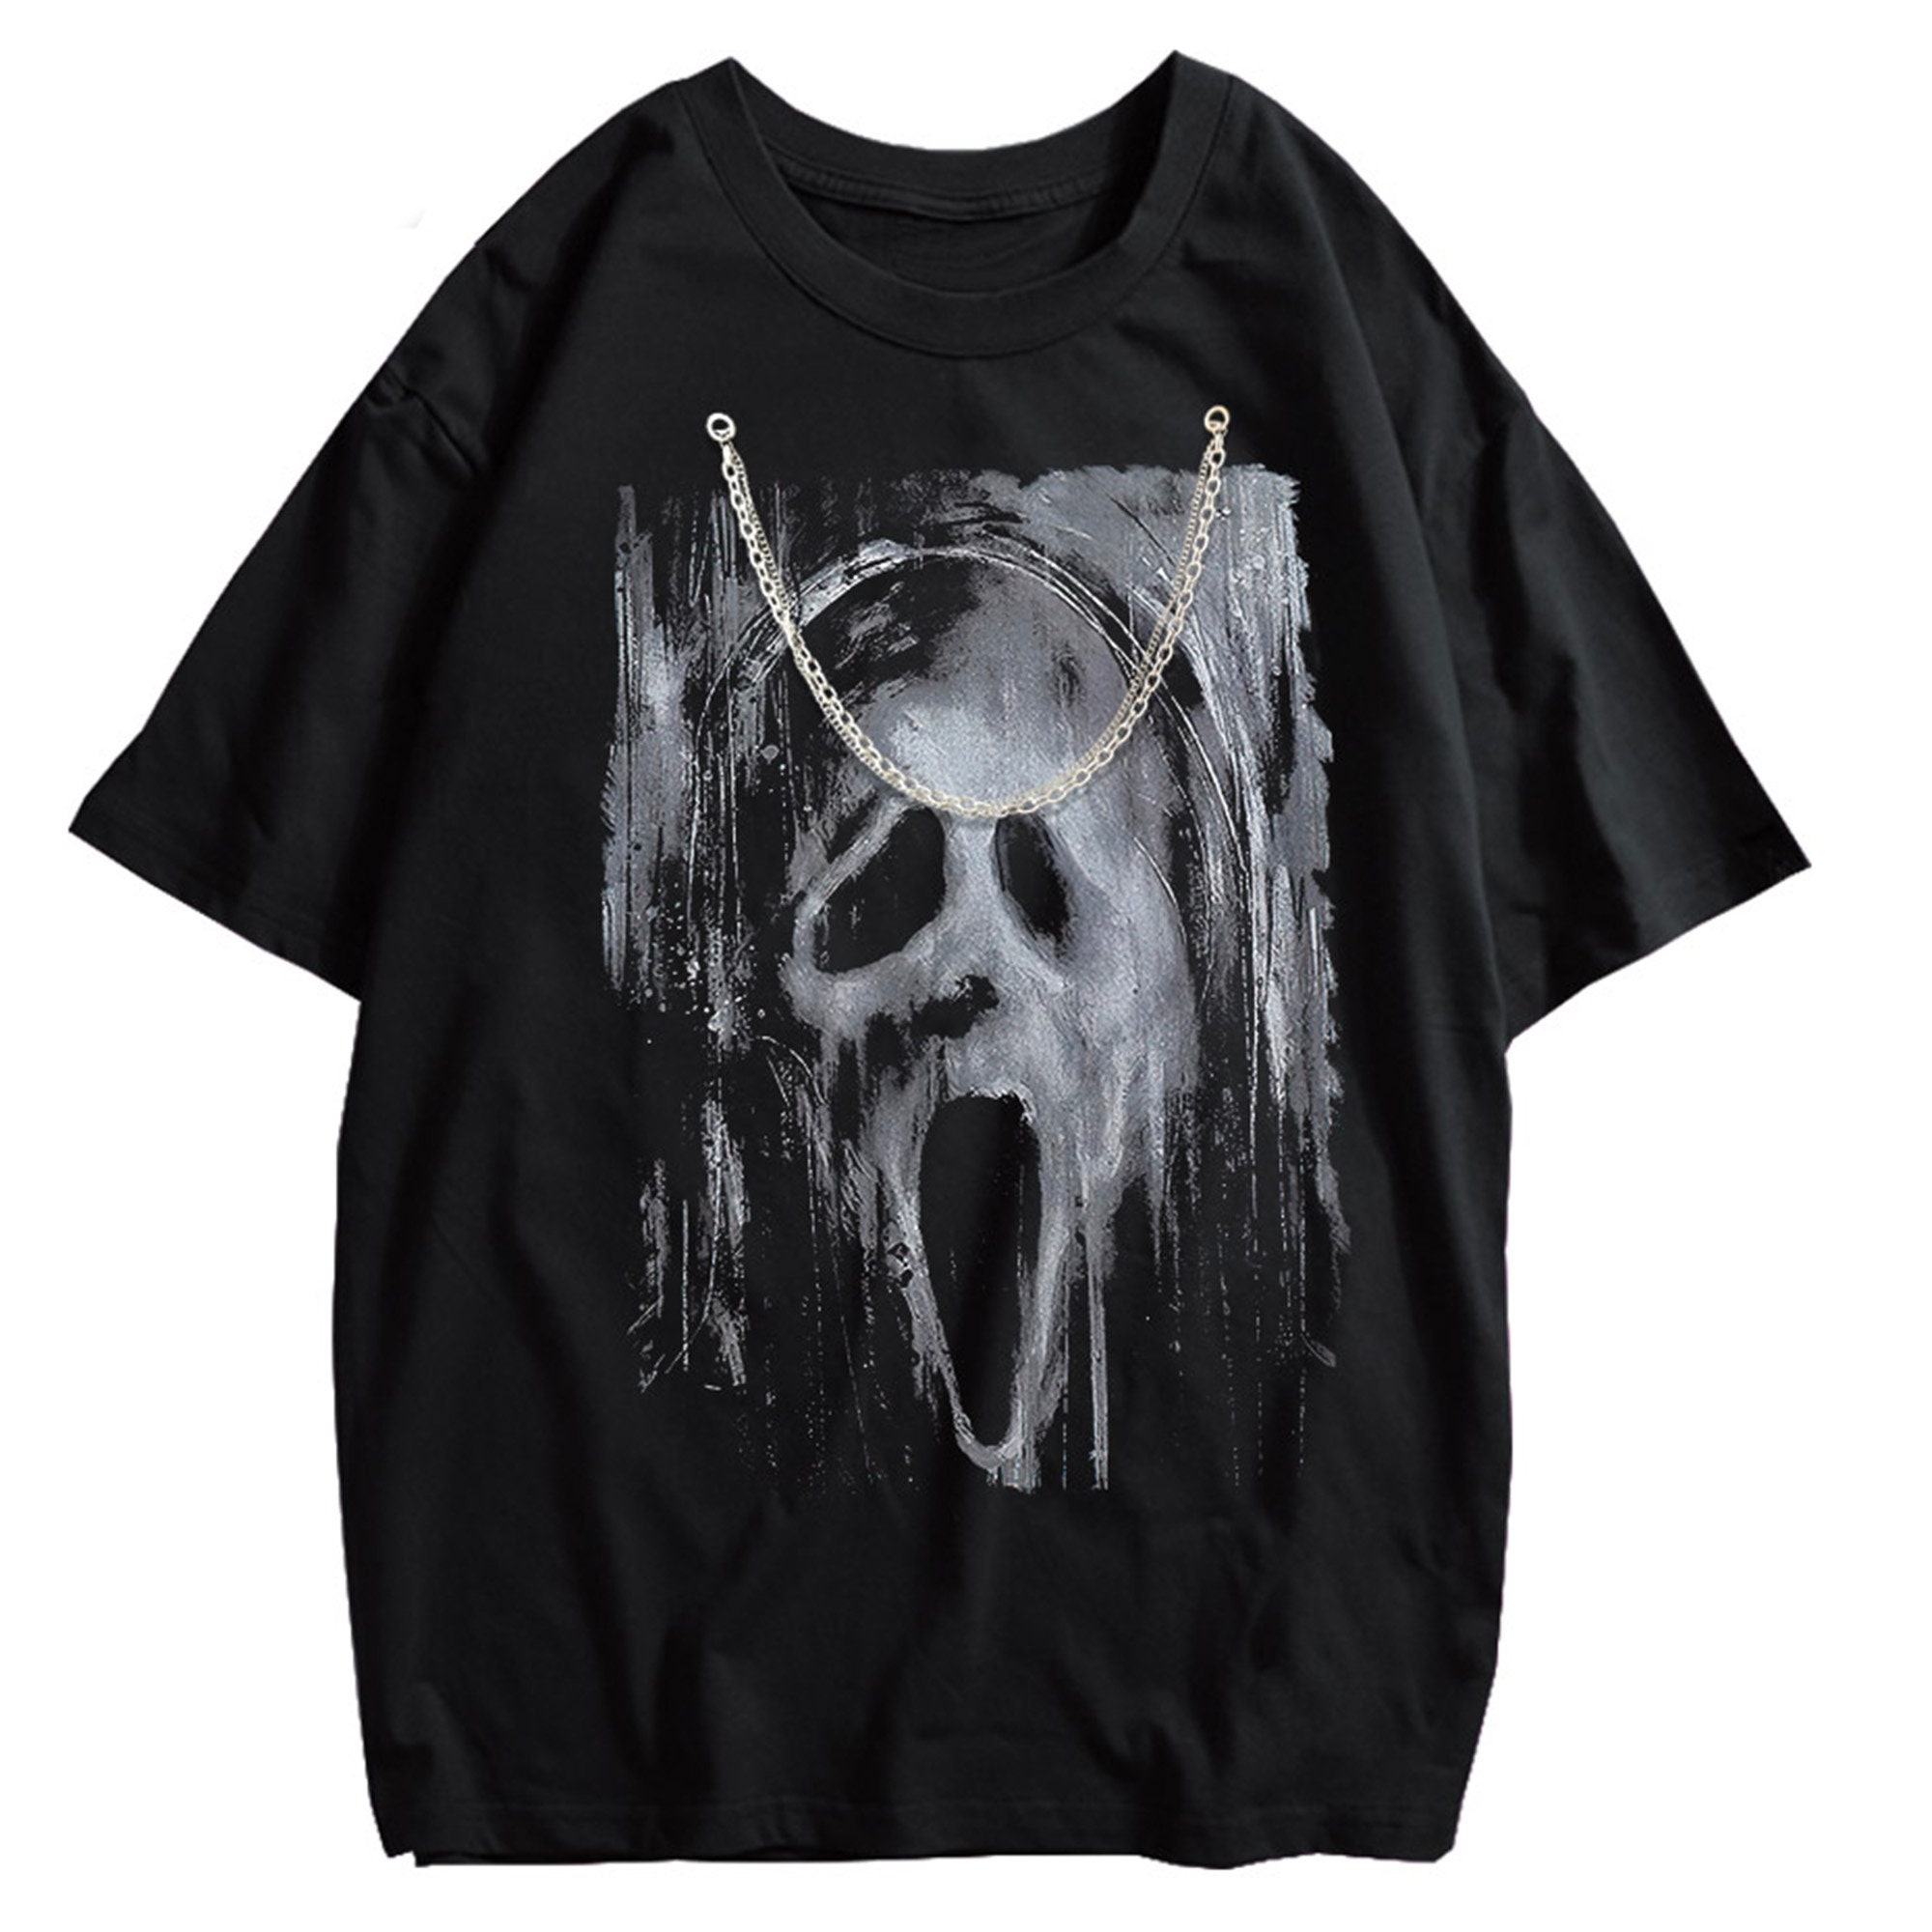 Discover Scream horror ghost face tshirt | 90s Grunge gothic shirt | Black washed shirt with skull white print